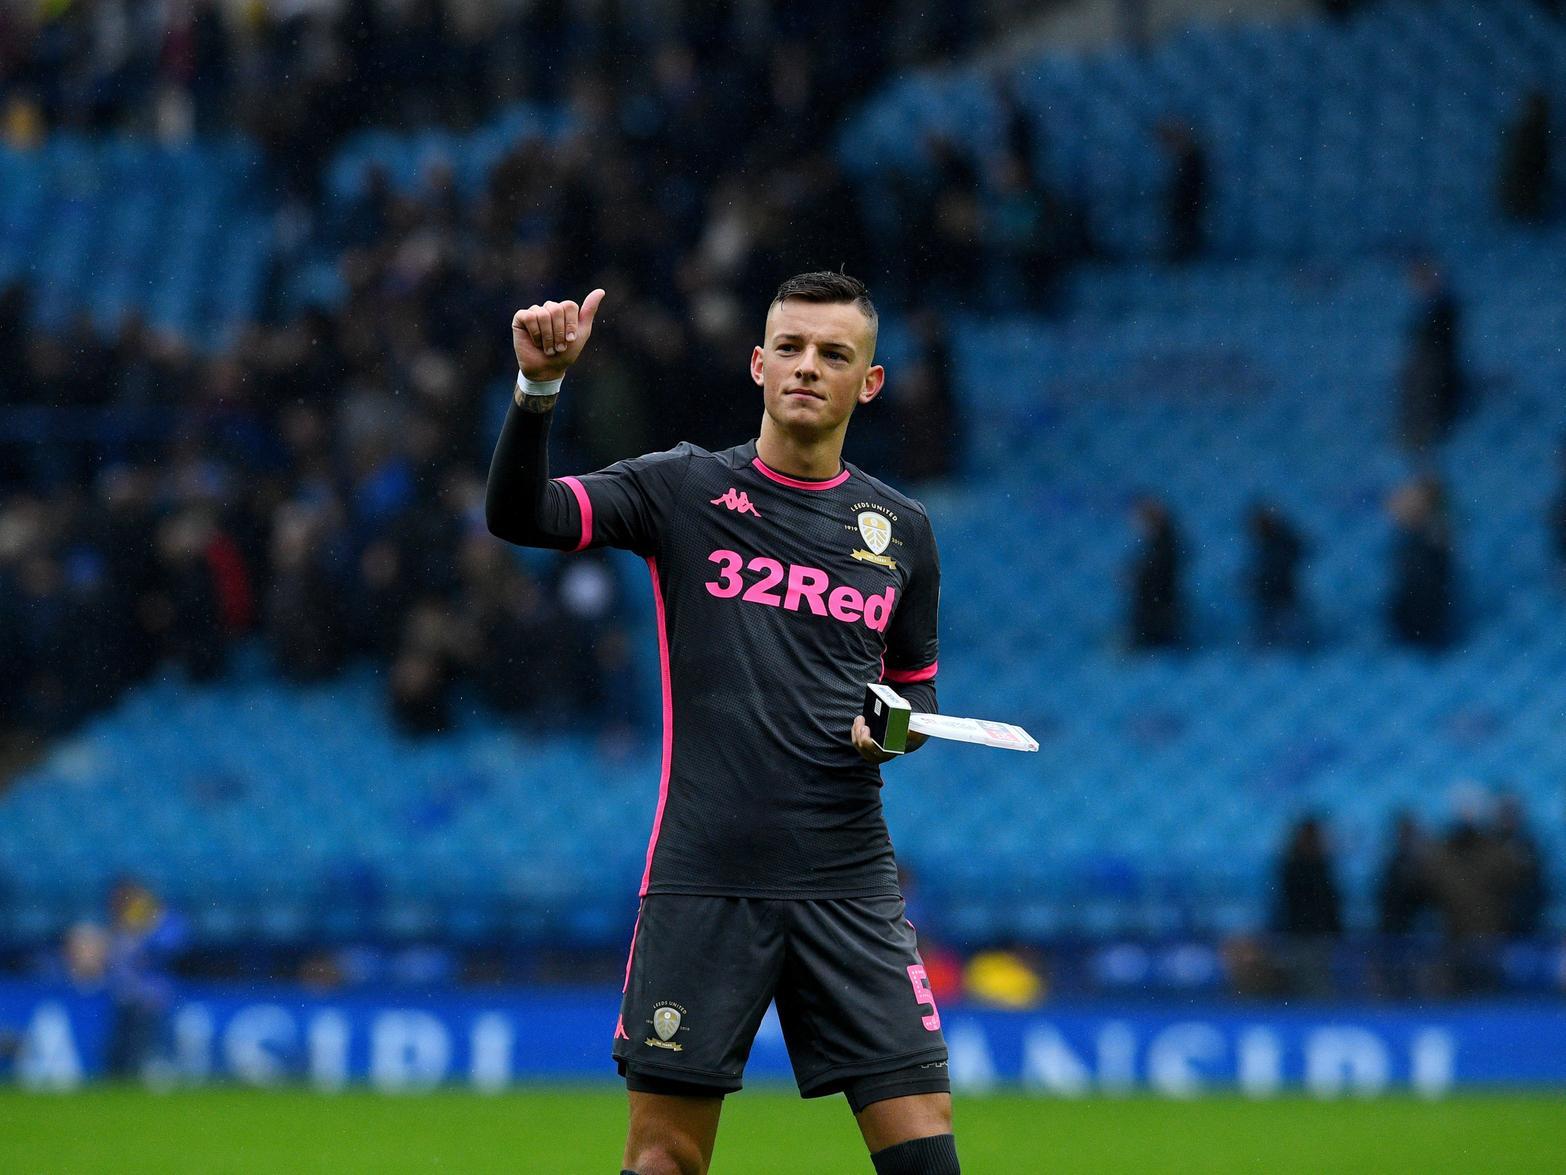 Marcelo Bielsa has already confirmed that the impressive Brighton loanee will move from centre-back to the holding midfield role to replace the banned Phillips. Photo by James Hardisty.